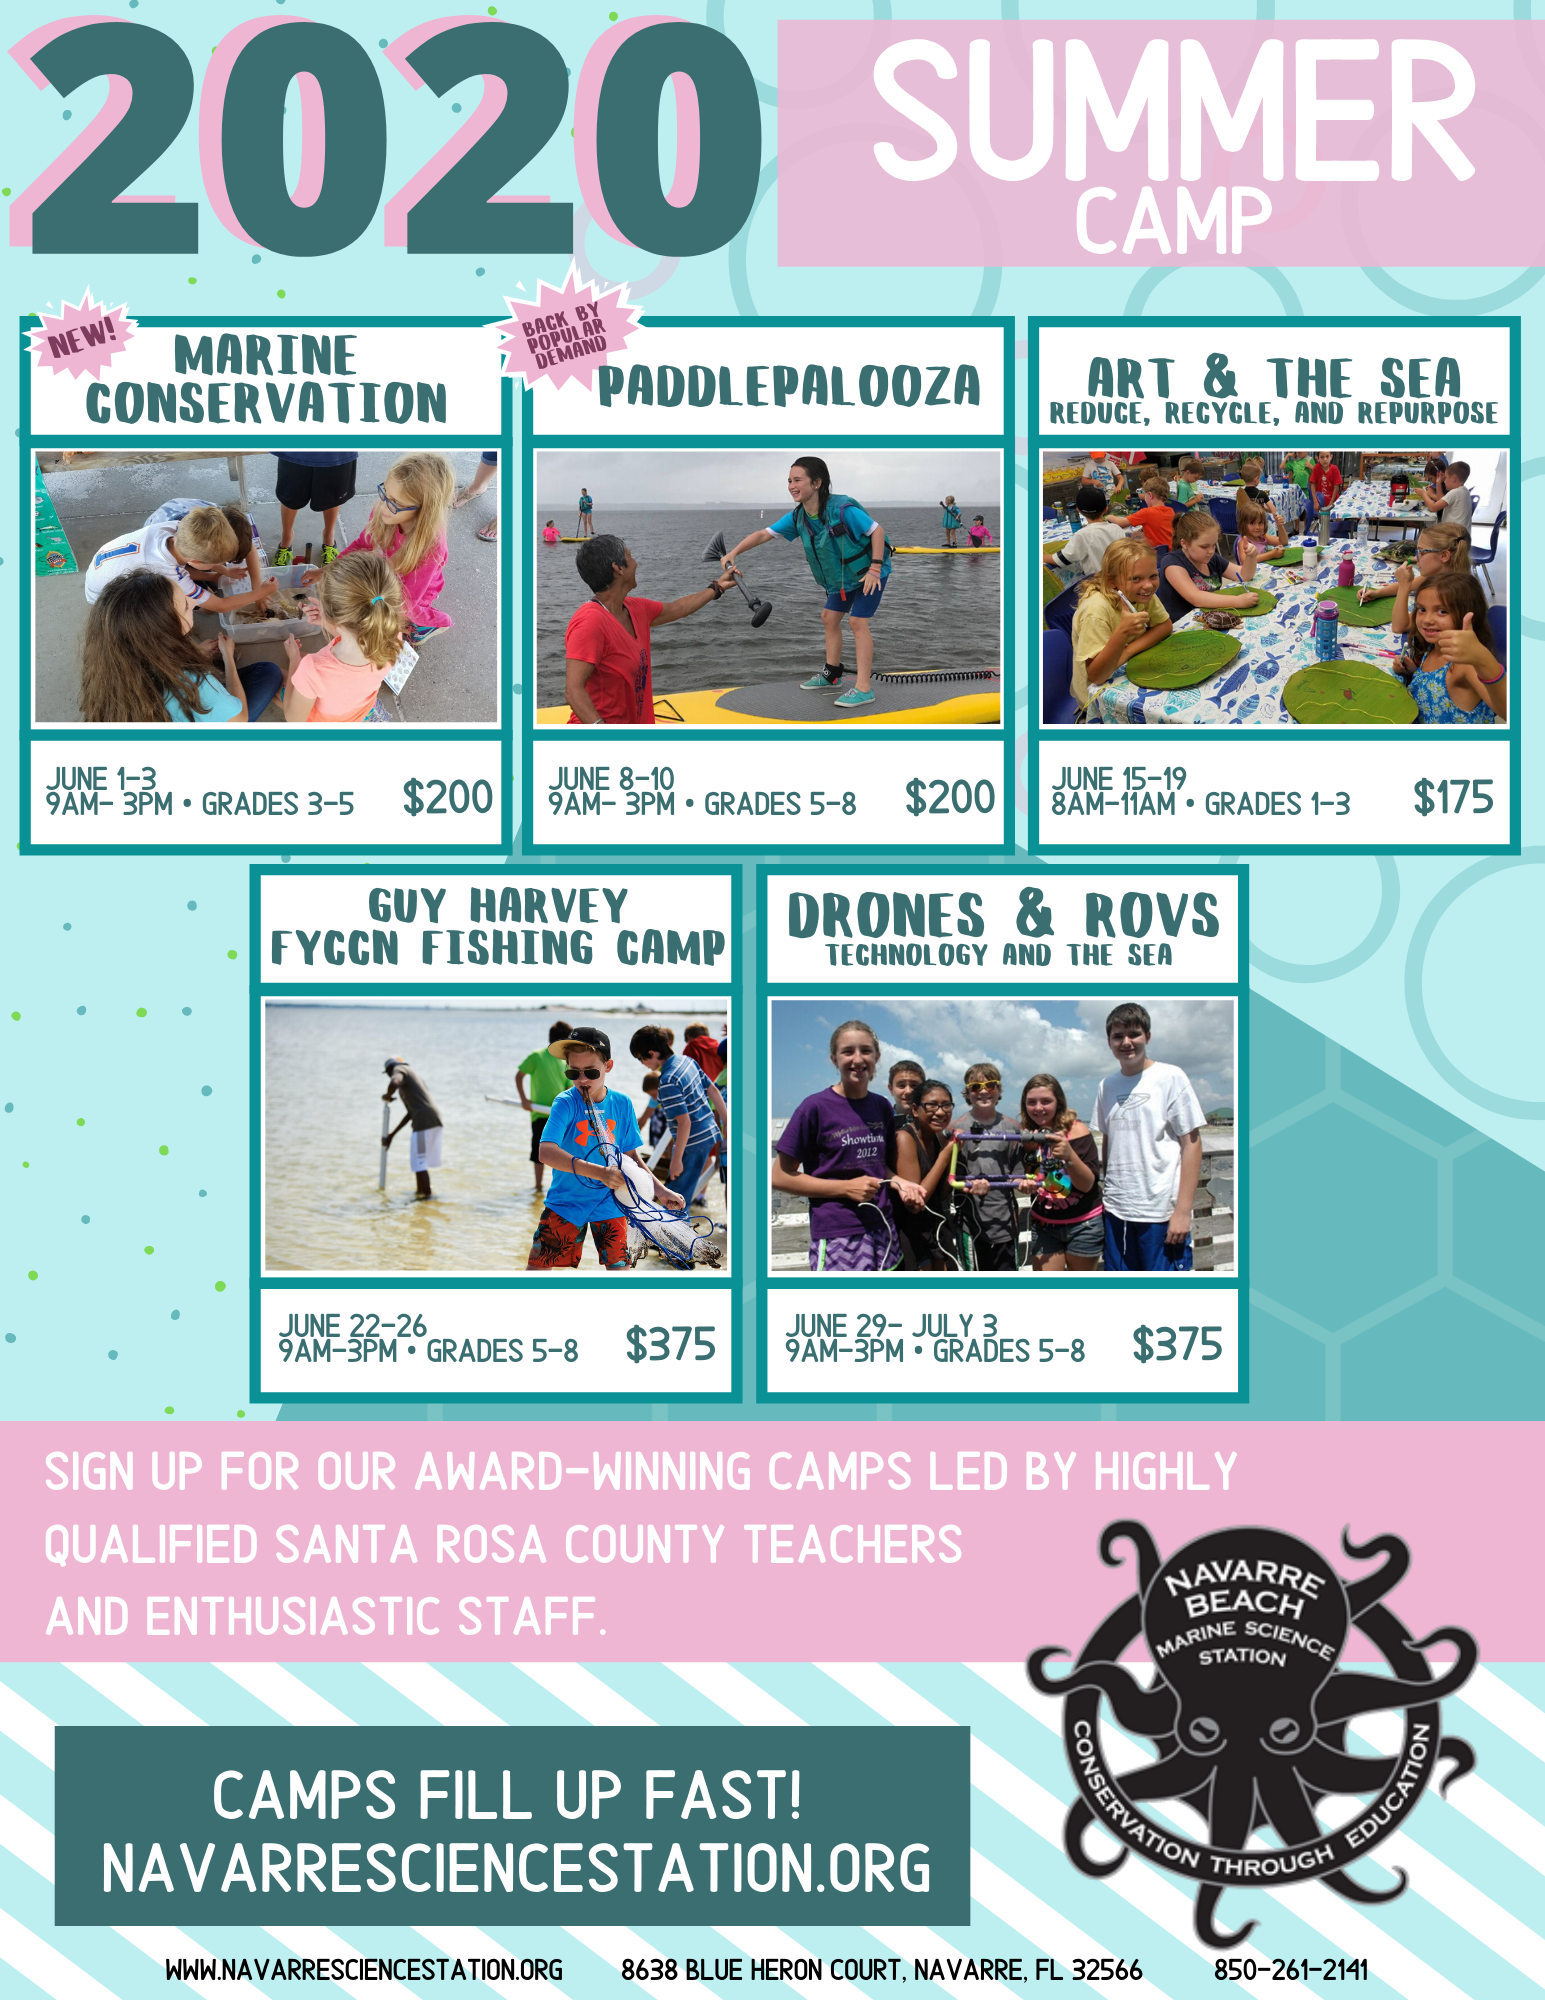 image is a picture of our summer camp schedule